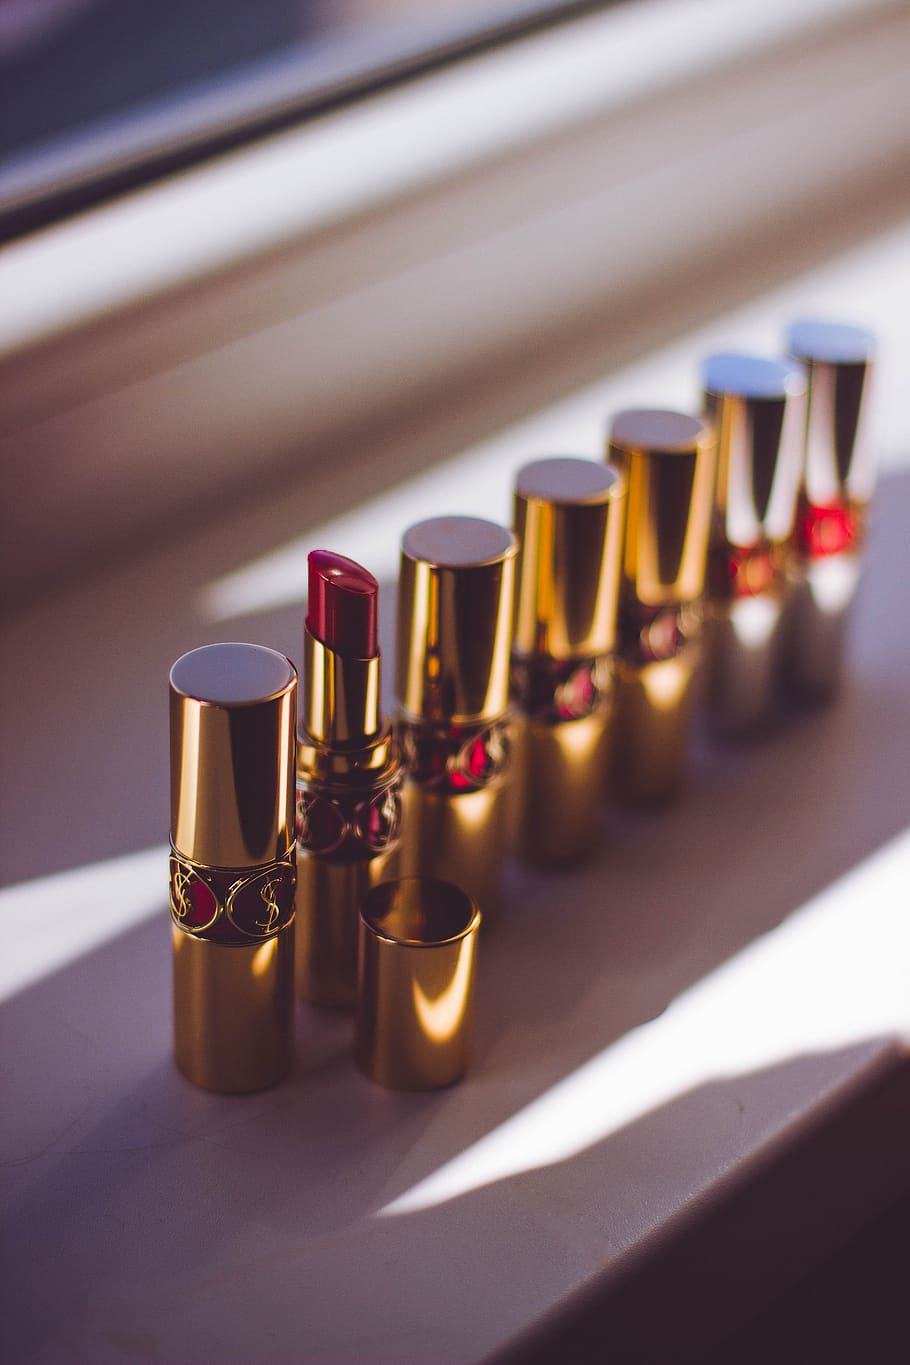 lipstick, beauty, fashion, makeup, collection, cosmetics, selective focus, in a row, close-up, indoors